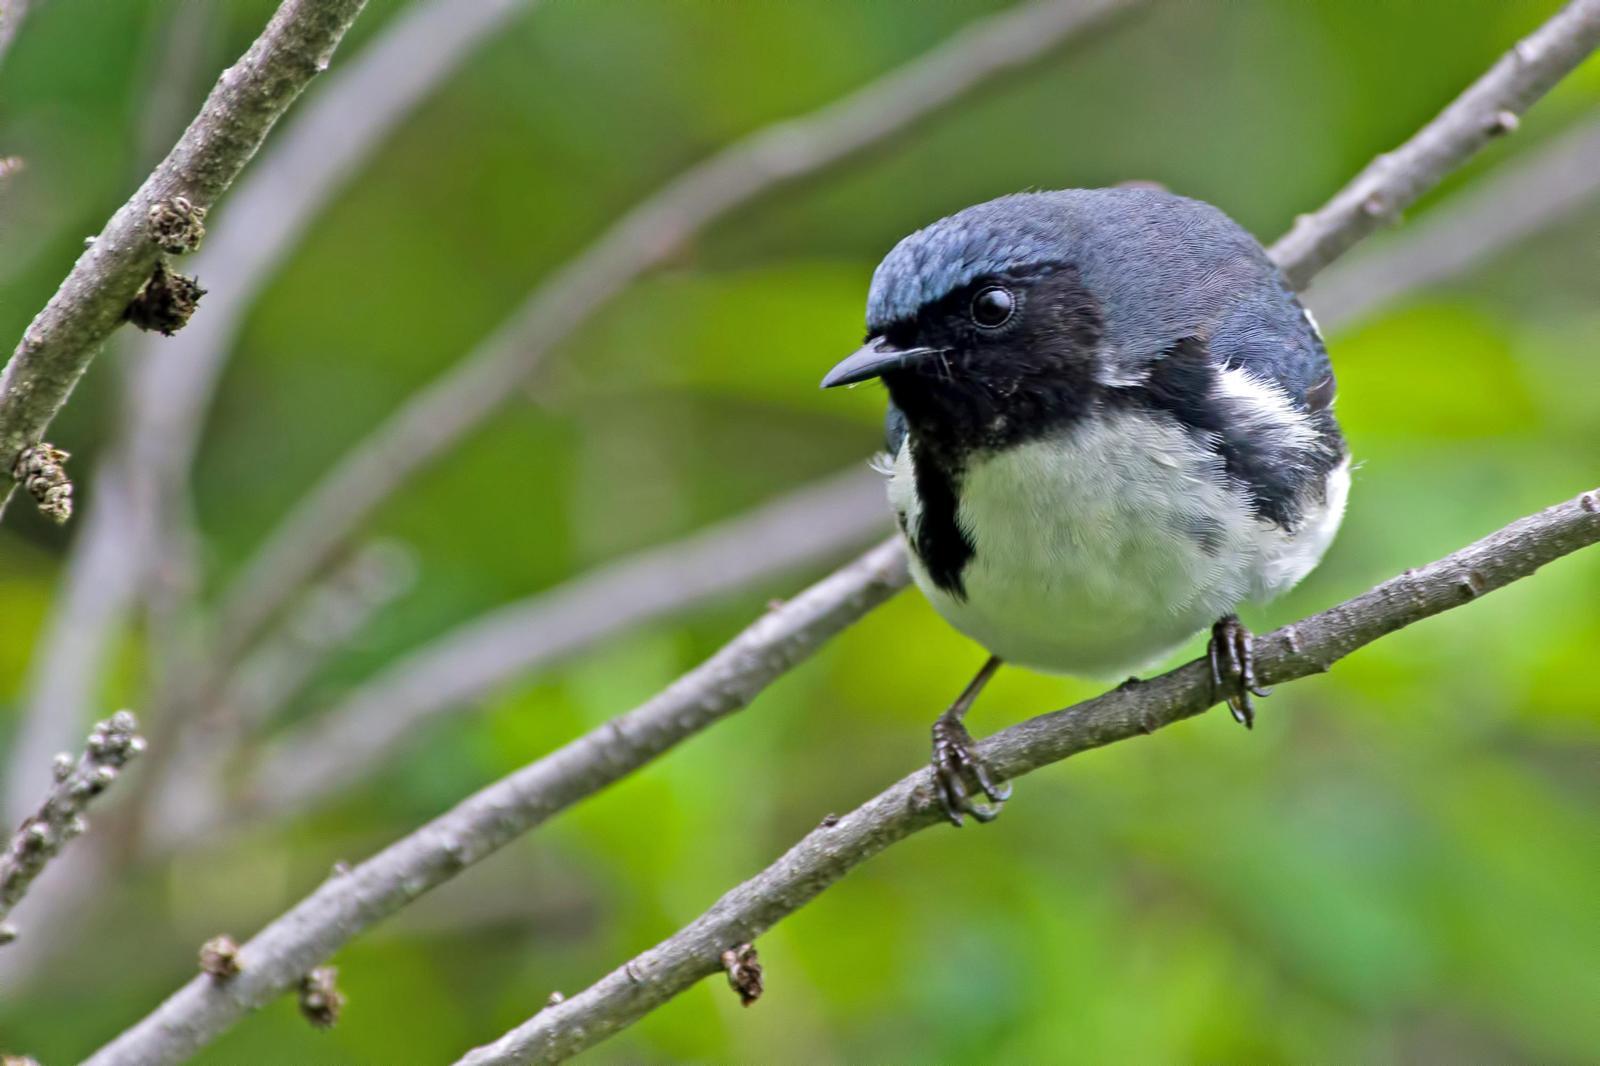 Black-throated Blue Warbler Photo by Rob Dickerson